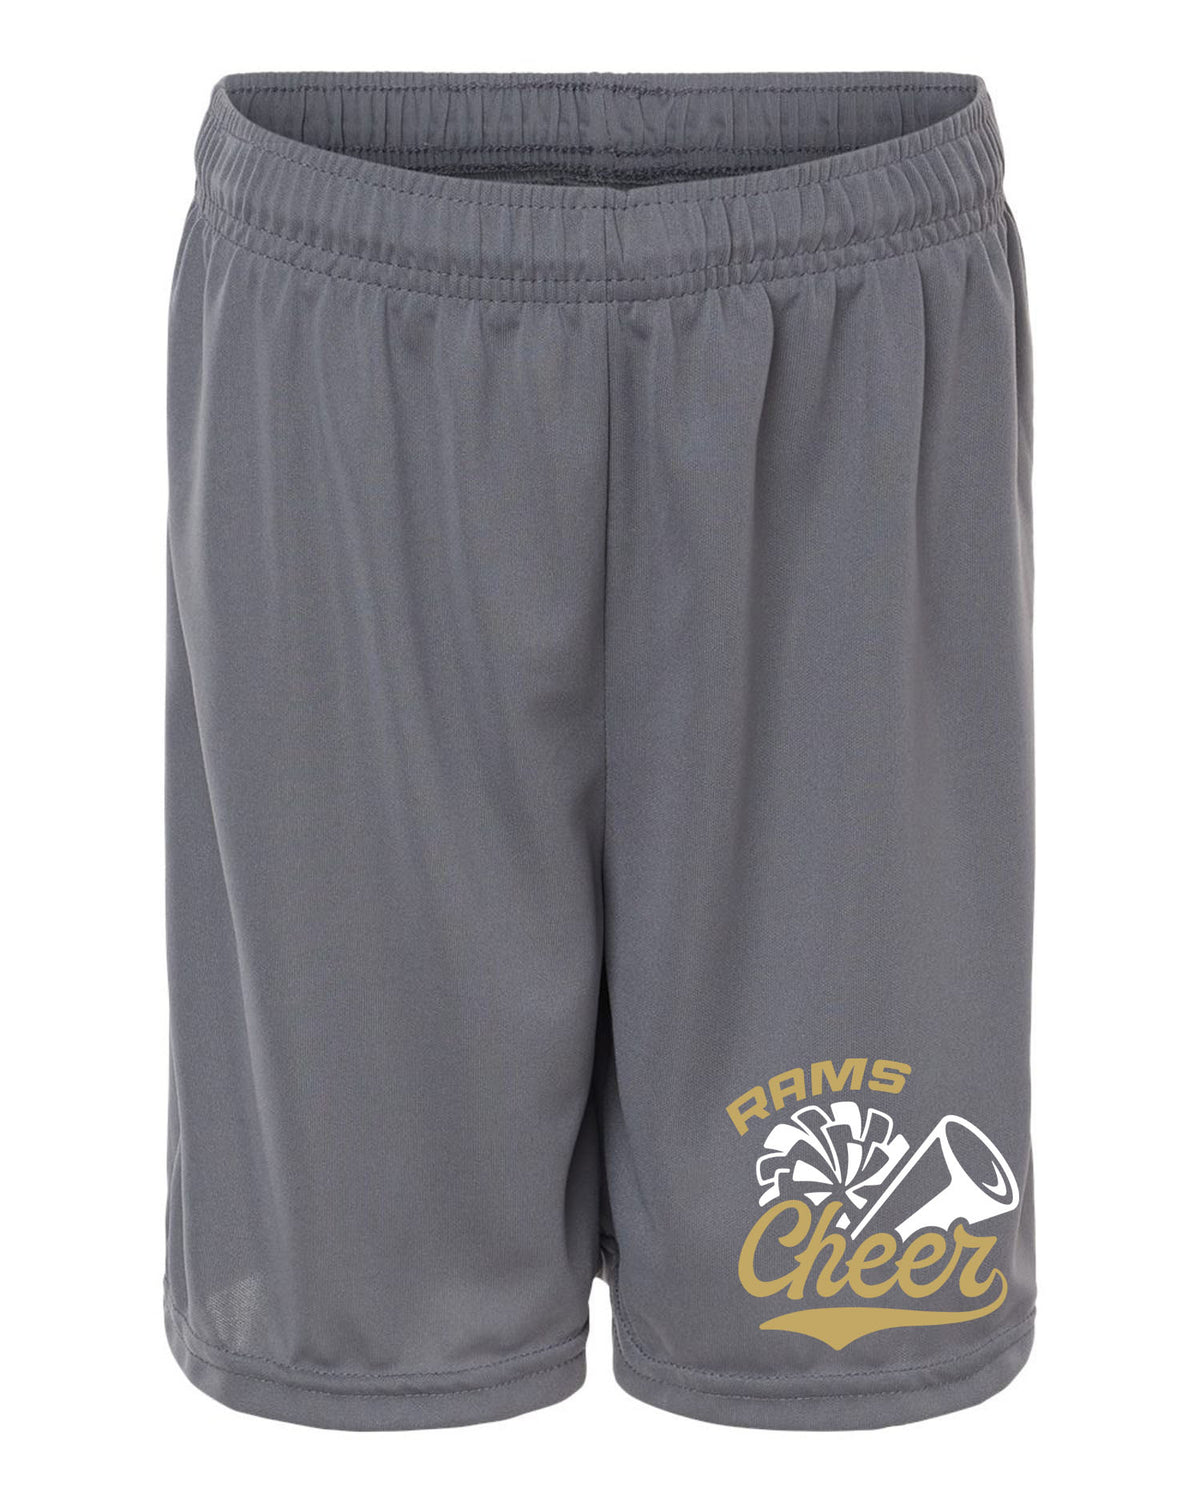 Sussex Middle Cheer Performance Shorts Design 1